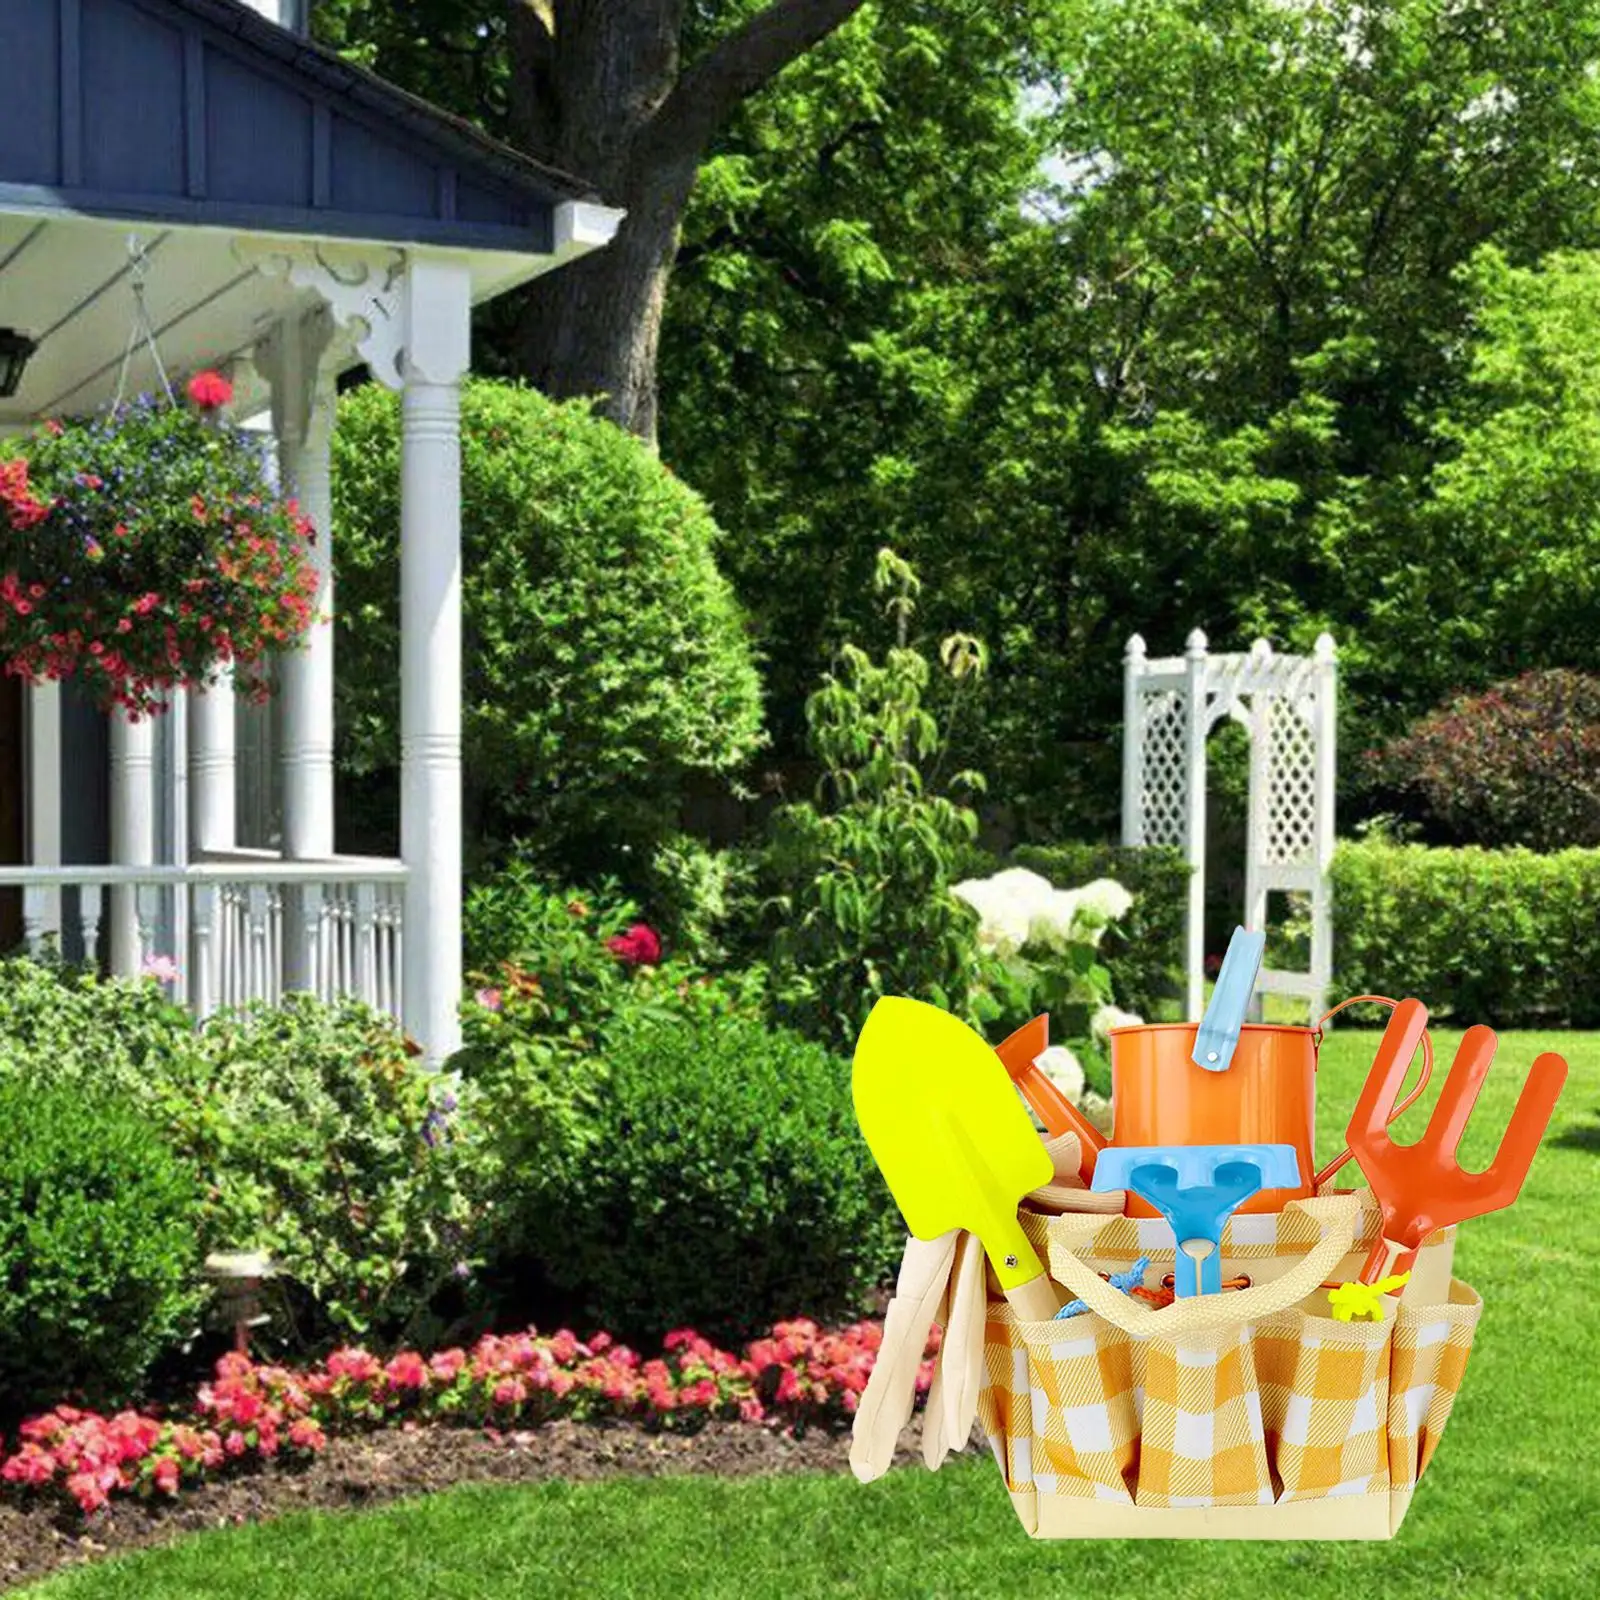 Kids Gardening Set Colorful Children Garden Tools With Watering Can Gloves